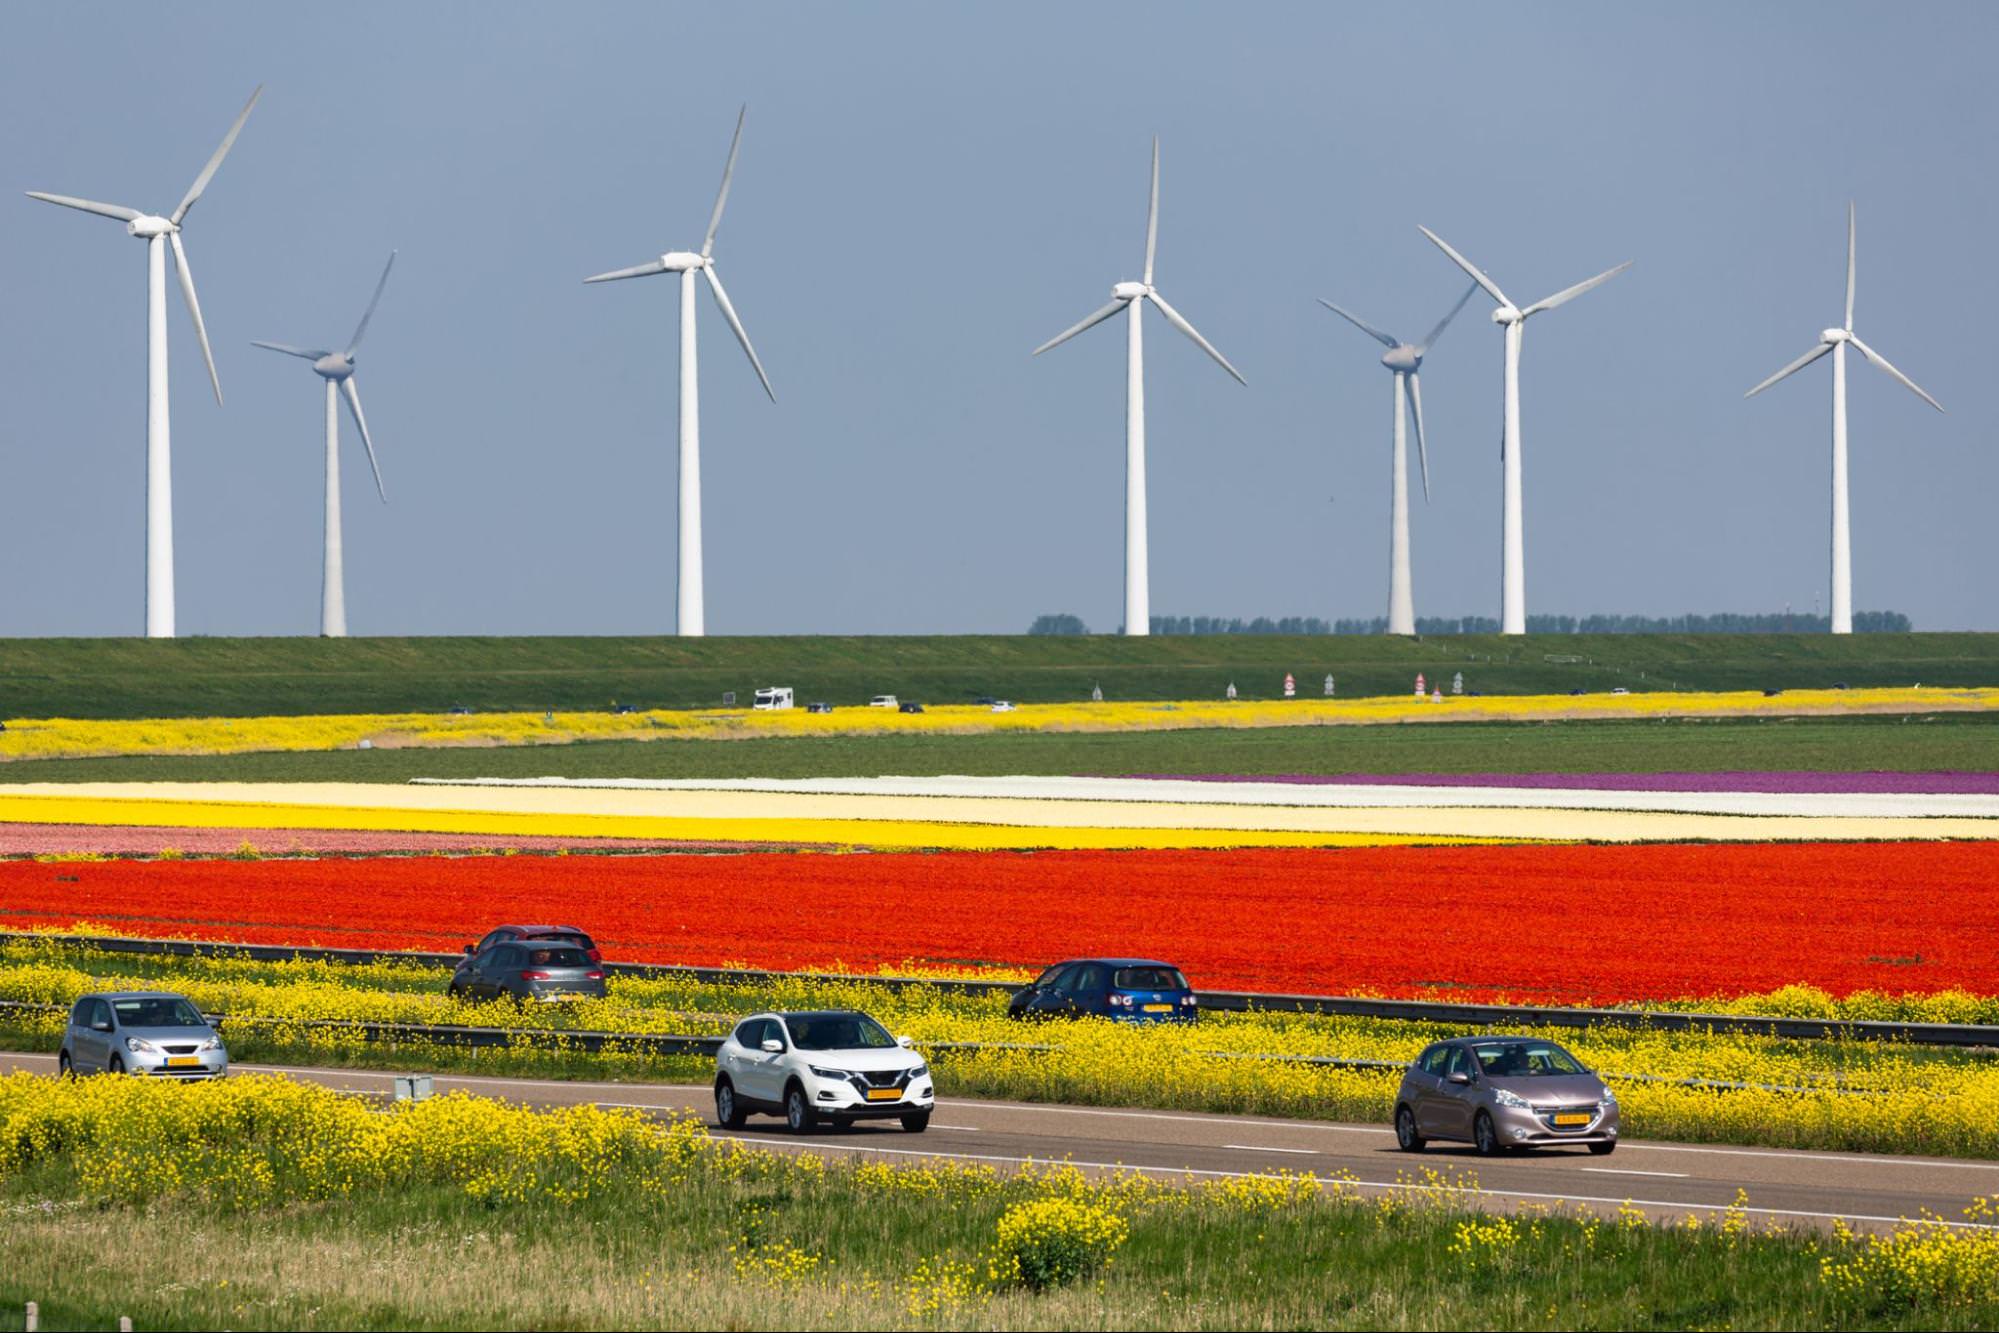 A colorful Dutch landscape with fields of red, yellow, and white flowers in the foreground. Several cars drive on a road through the fields.